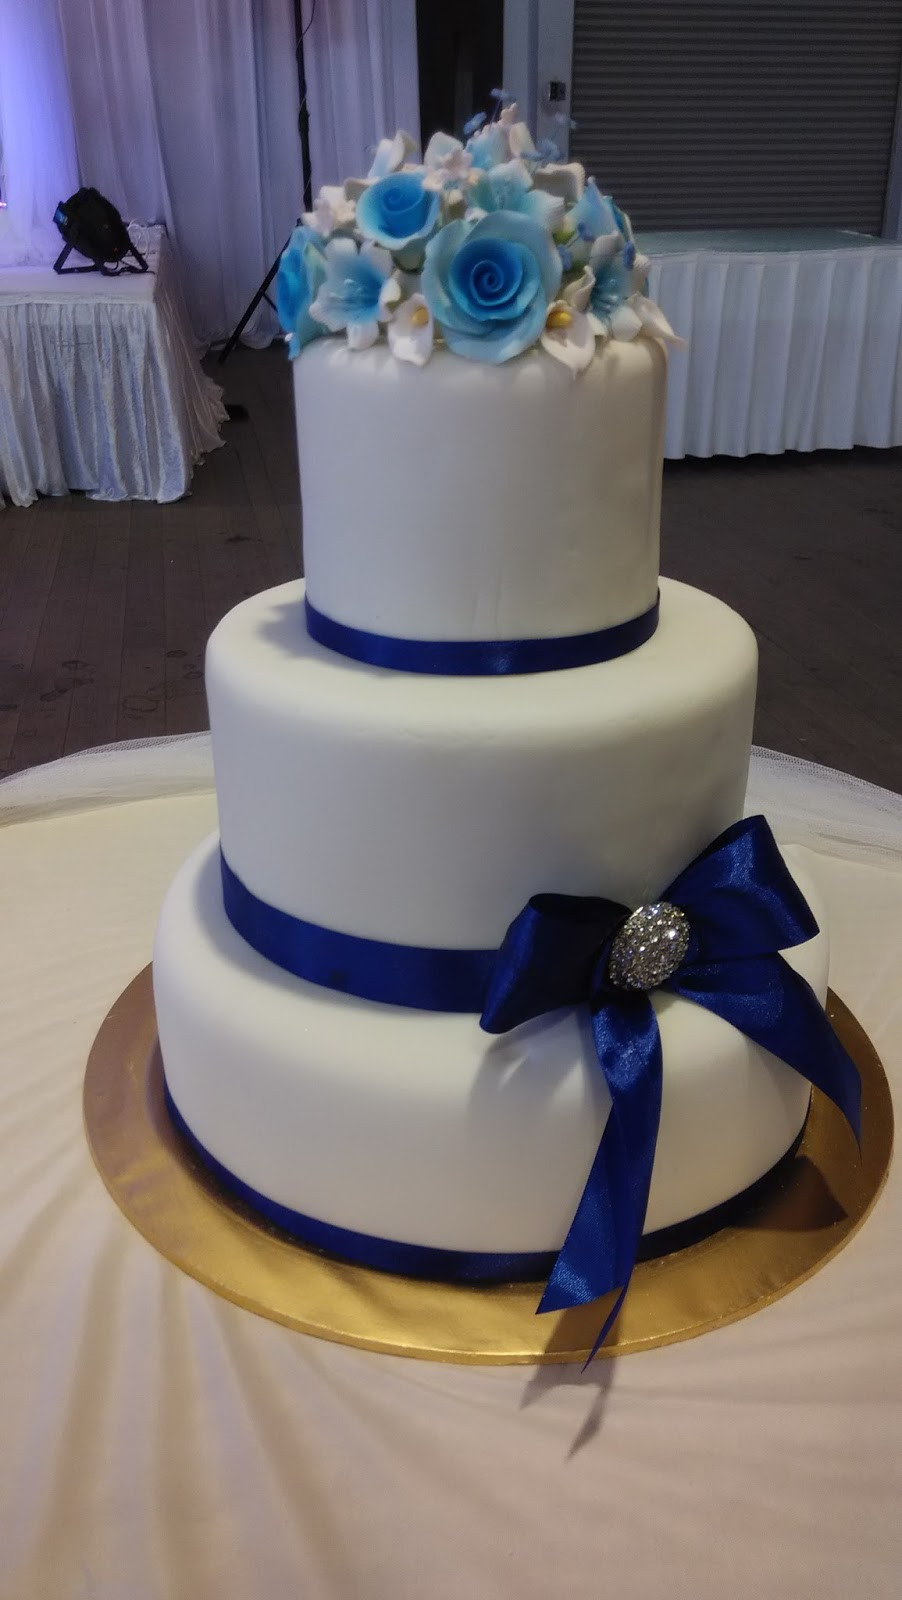 Royal Blue And Purple Wedding Cakes
 jujucupcakes Royal Blue and Purple themed wedding cakes